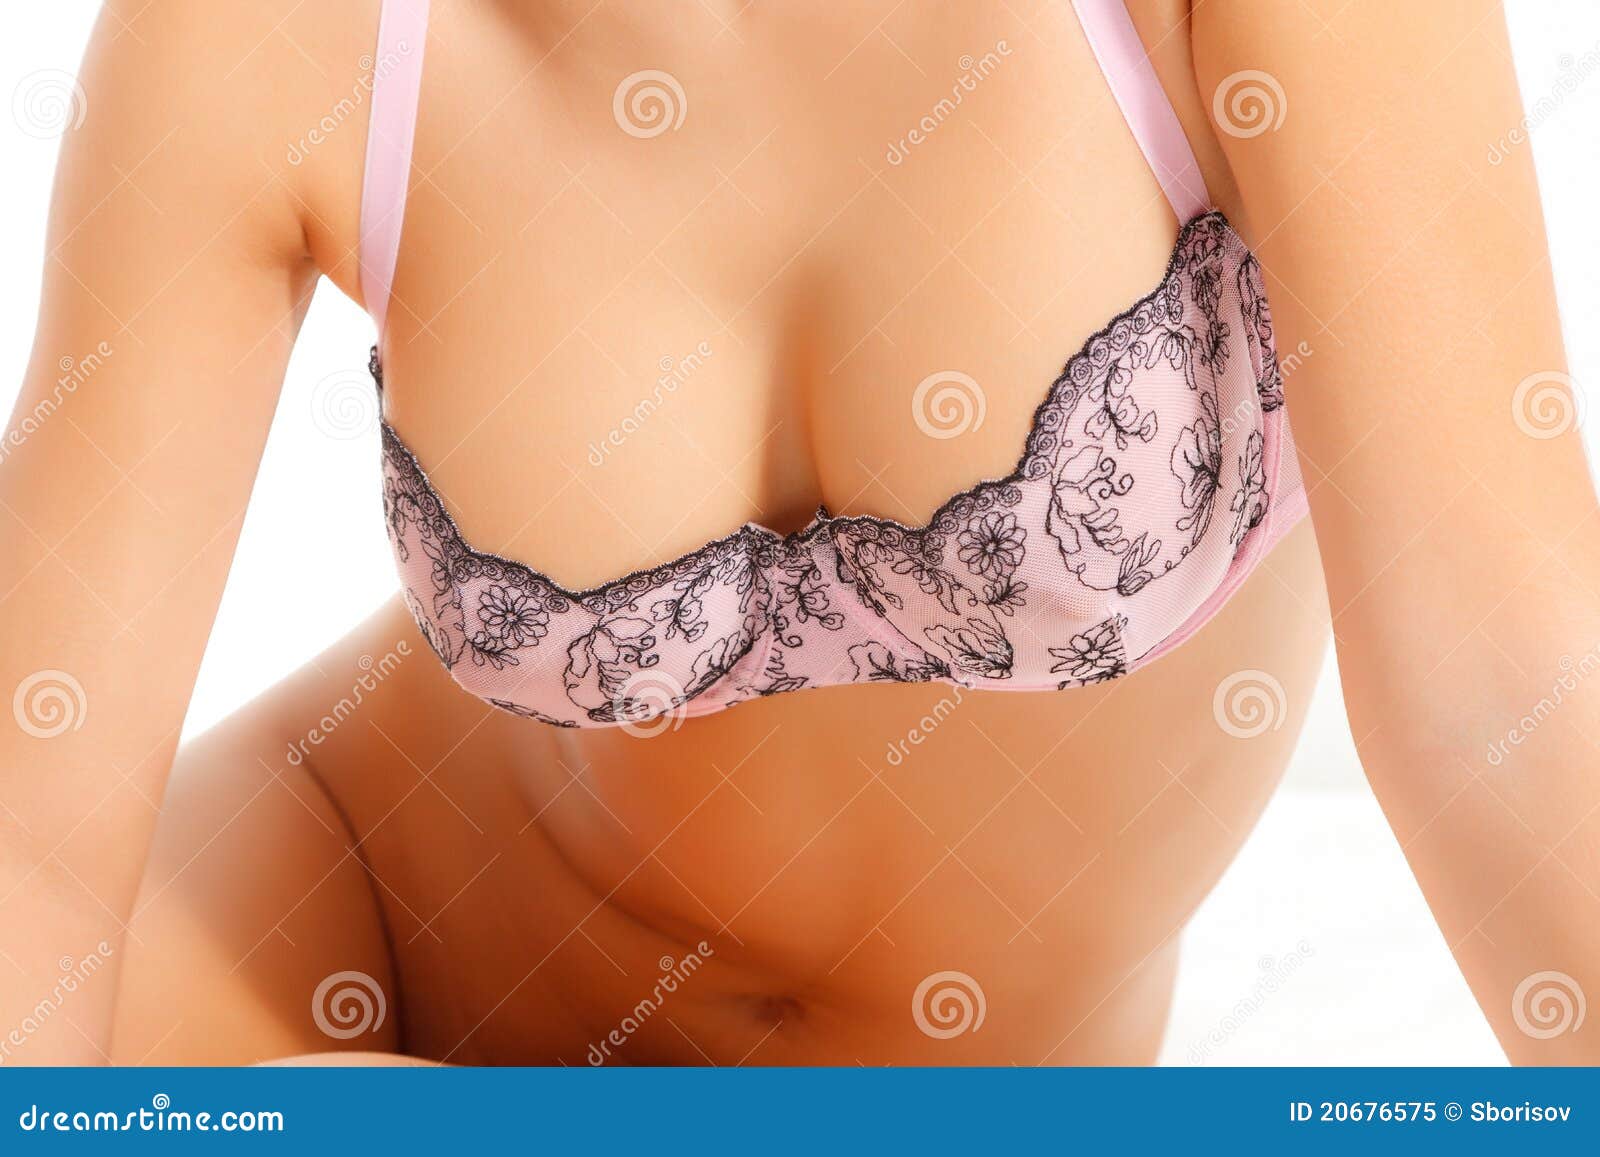 Close-up of woman breast stock image. Image of fashion - 20676575